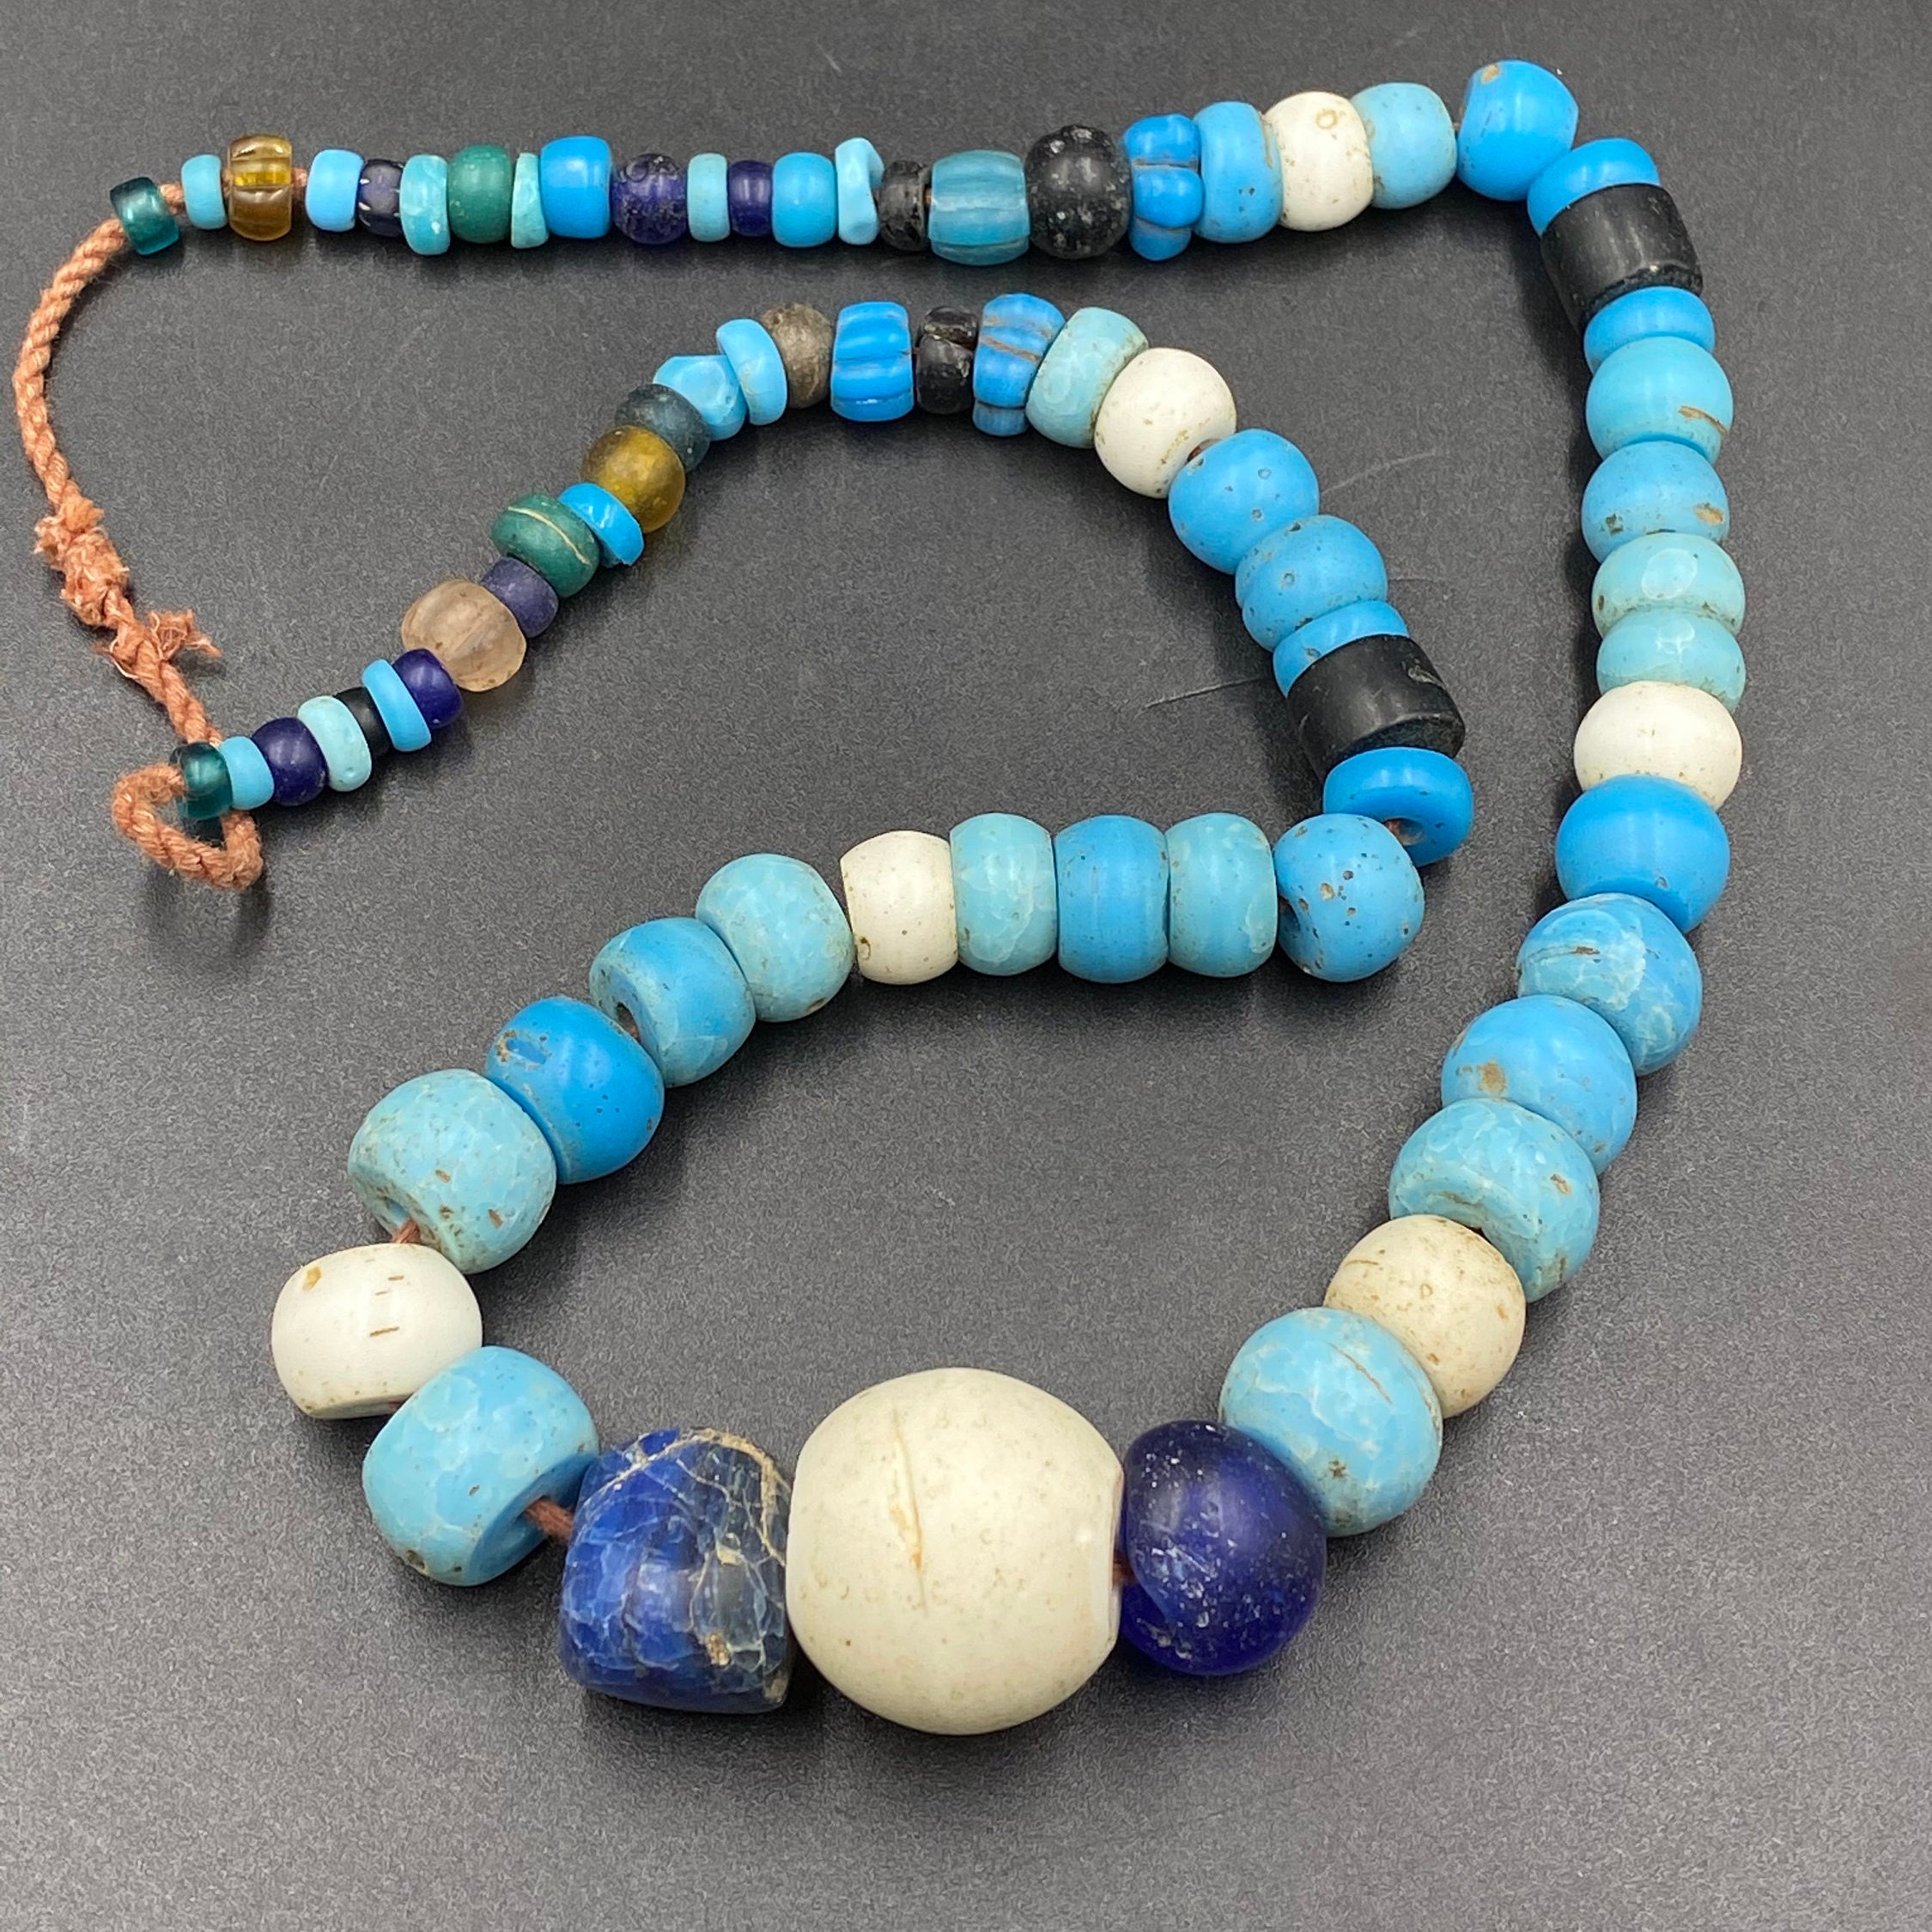 Old Himalayan Ancient Antique Naga Glass Beads Necklace From - Etsy